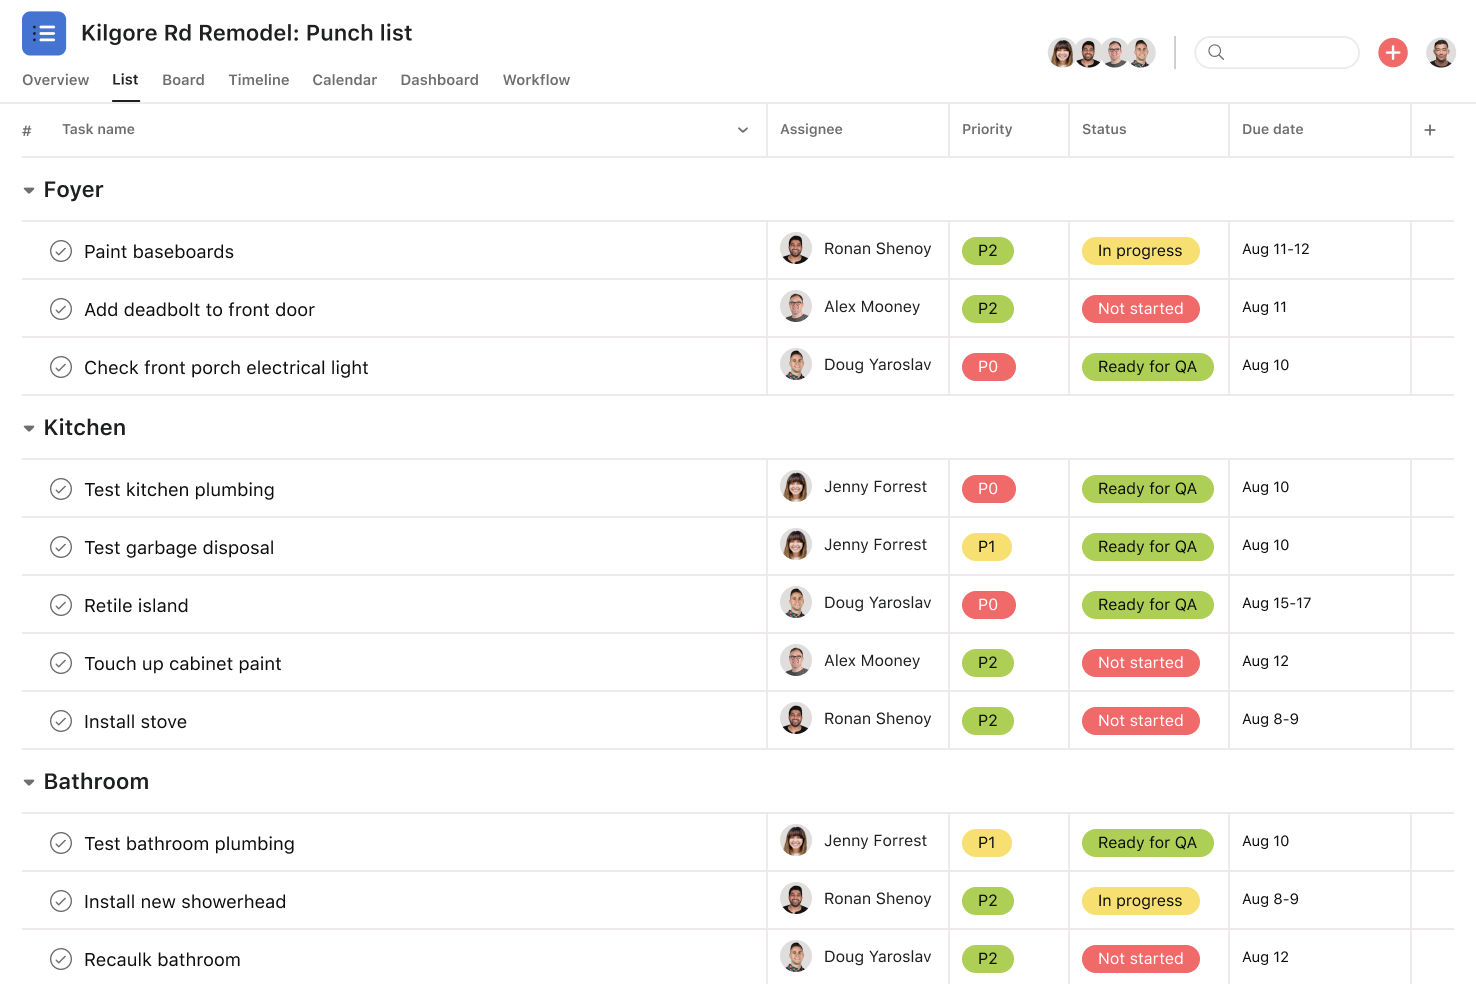 [Product ui] Punch list in Asana, spreadsheet-style project view (List)